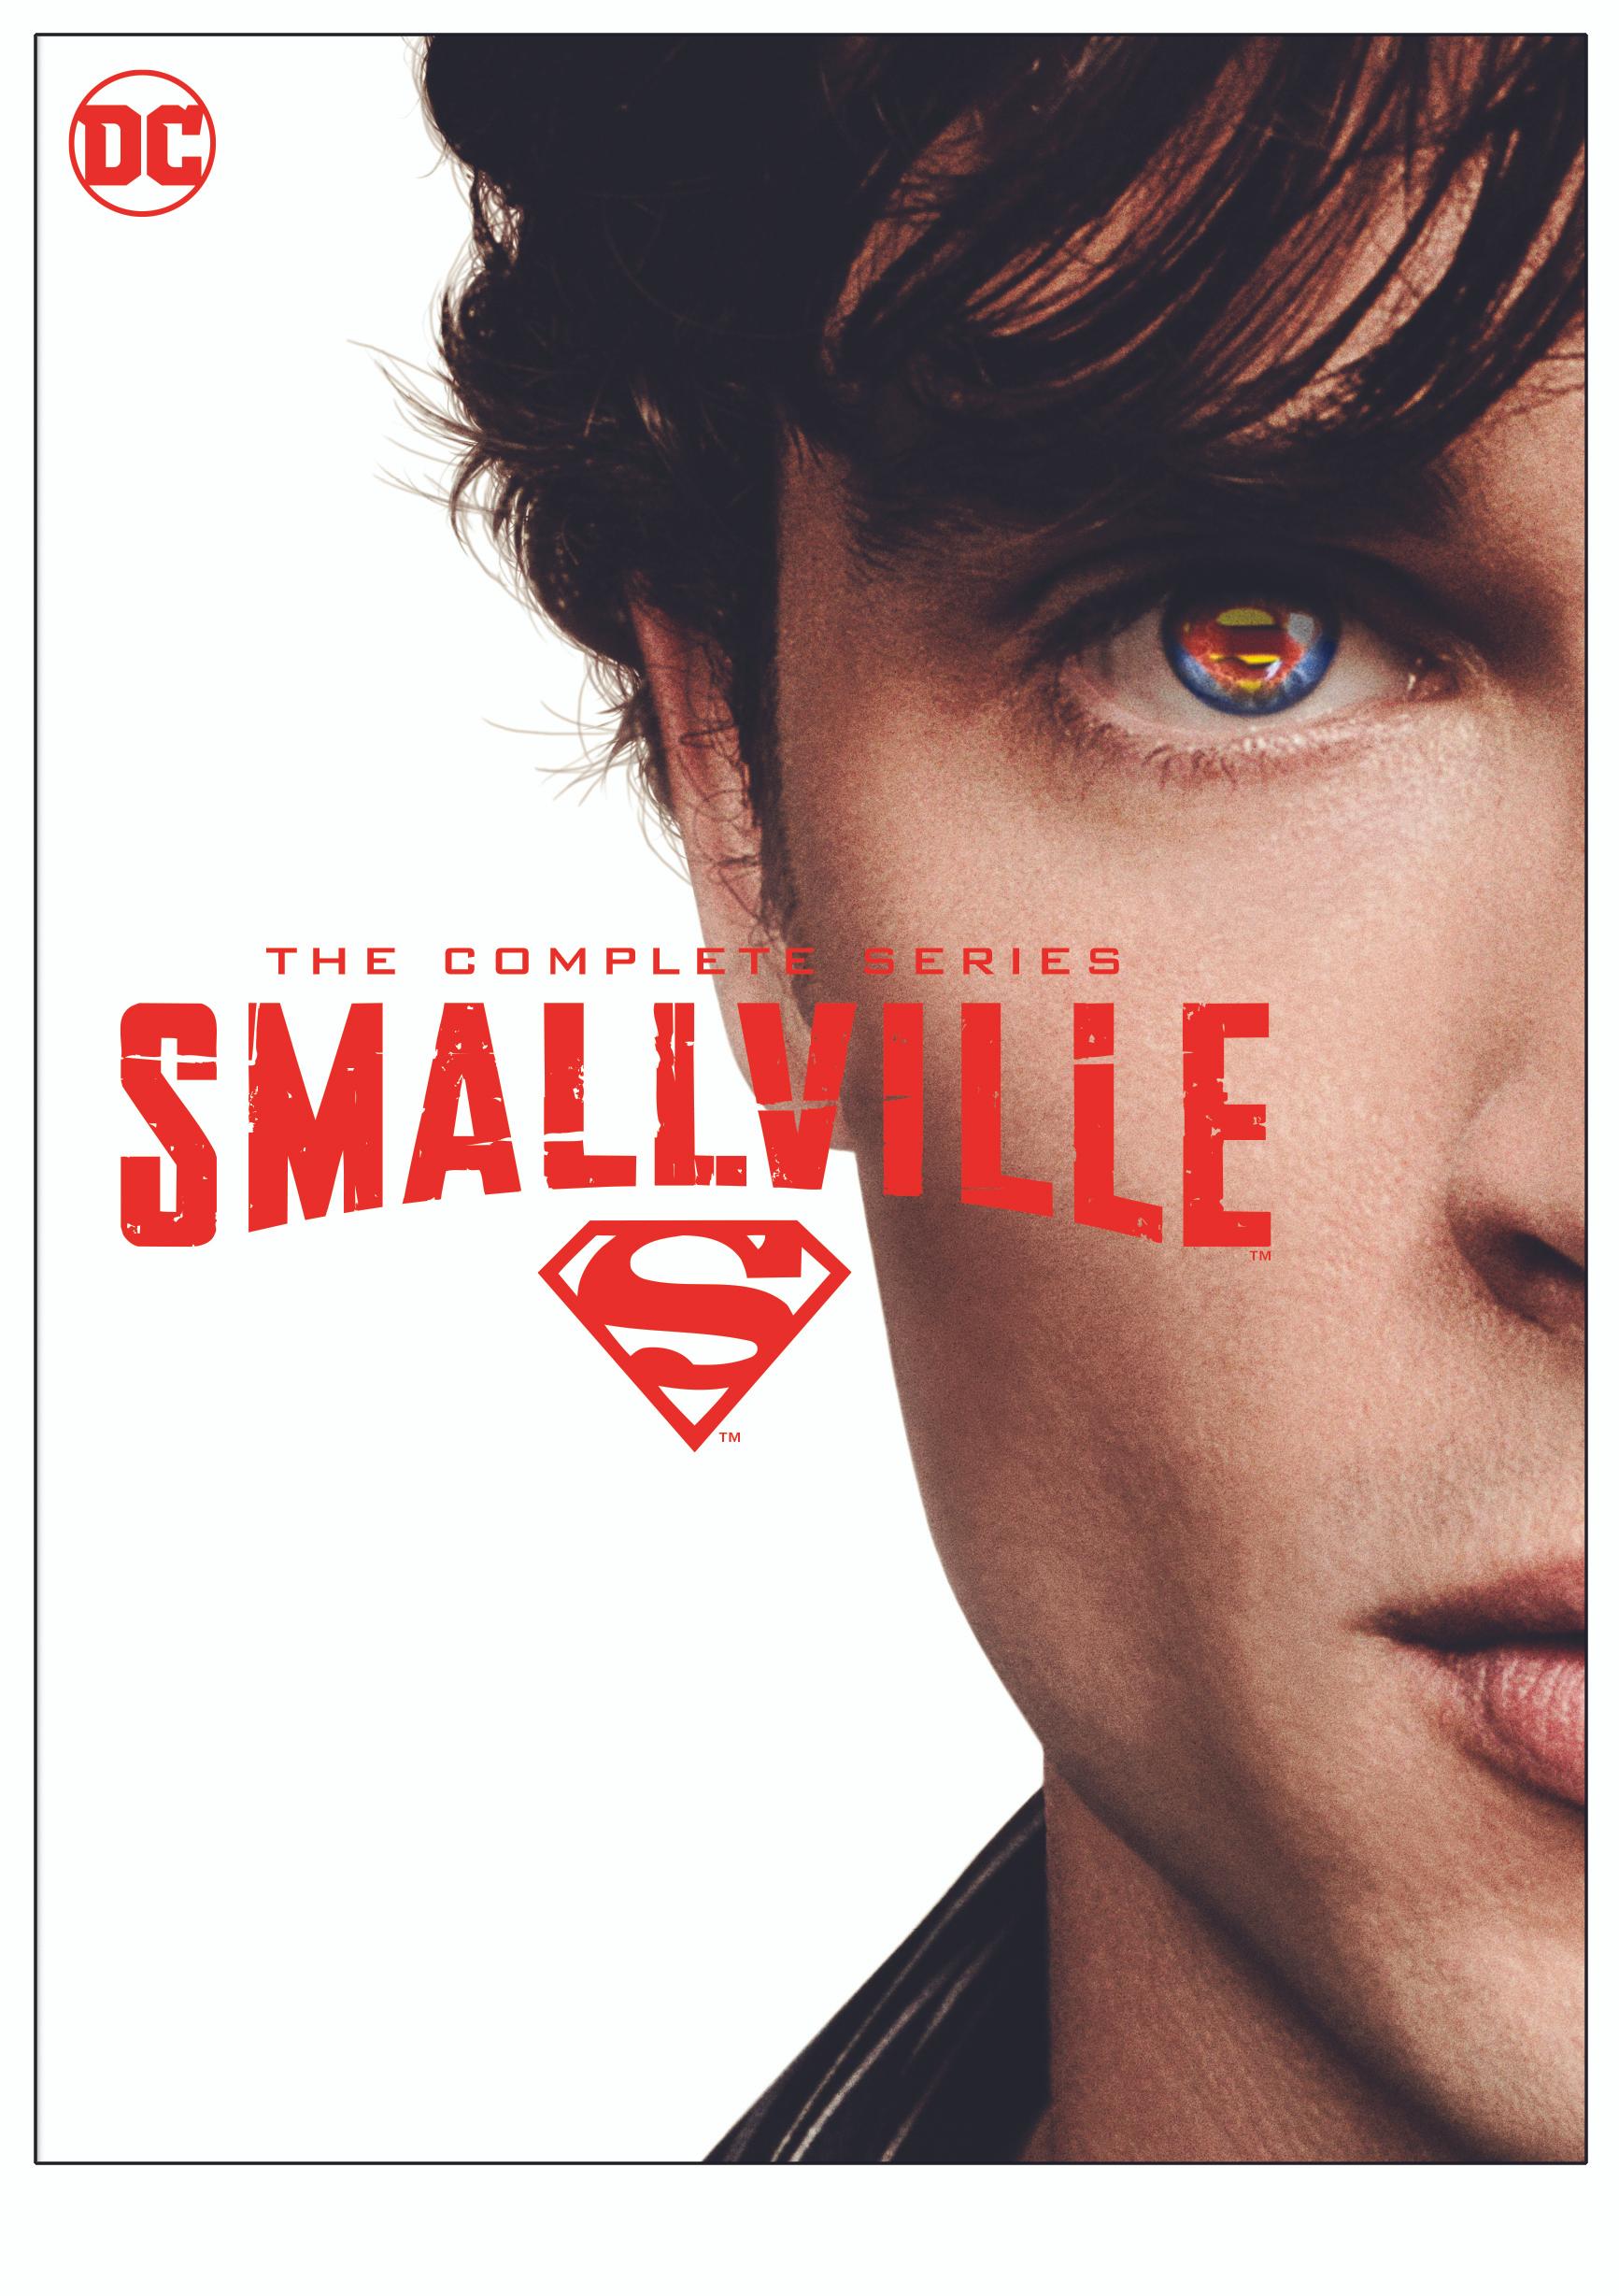 Smallville: The Complete Series (Box Set (20th Anniversary Edition)) - DVD [ 2011 ]  - Sci Fi Television On DVD - TV Shows On GRUV